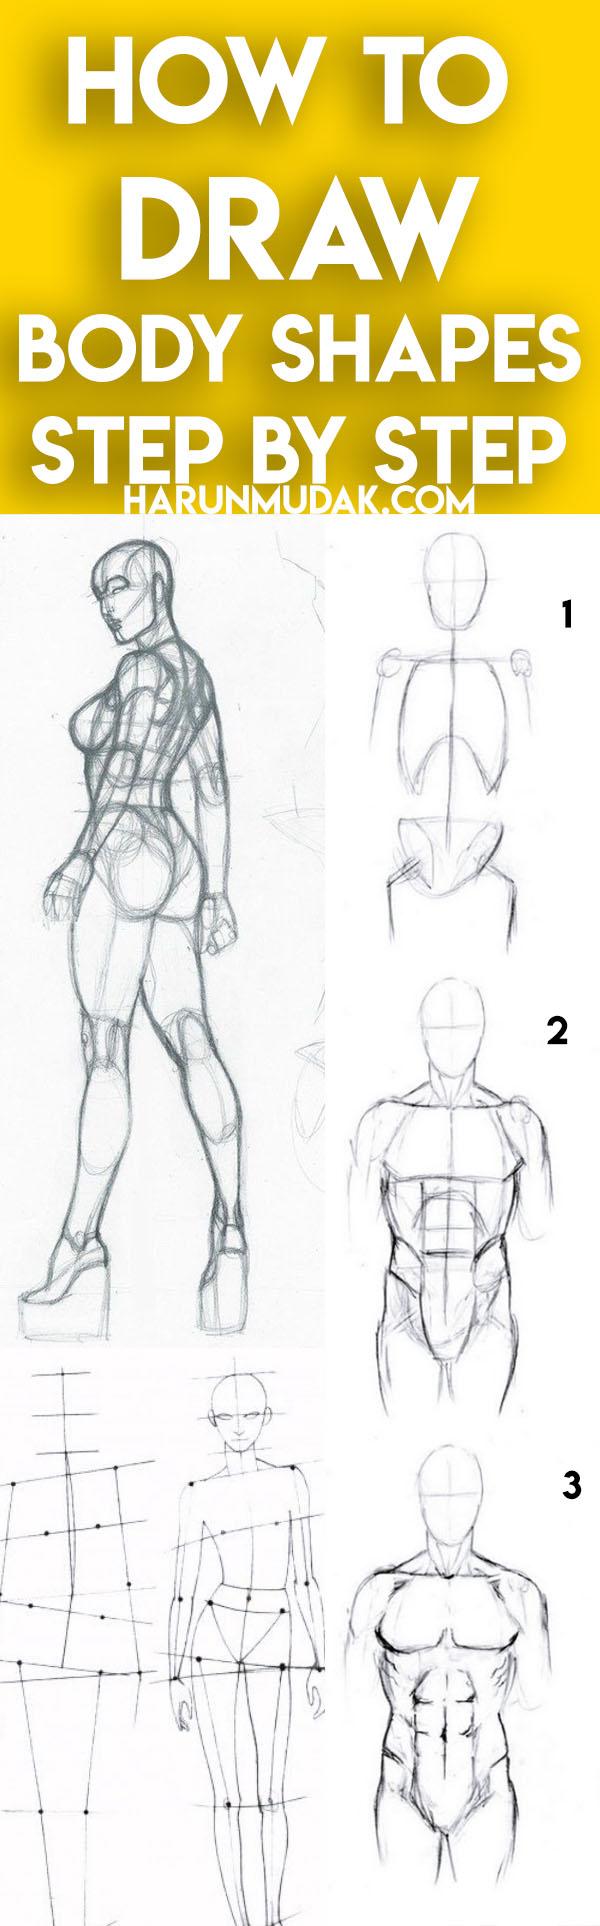 10+ Draw Body Shapes